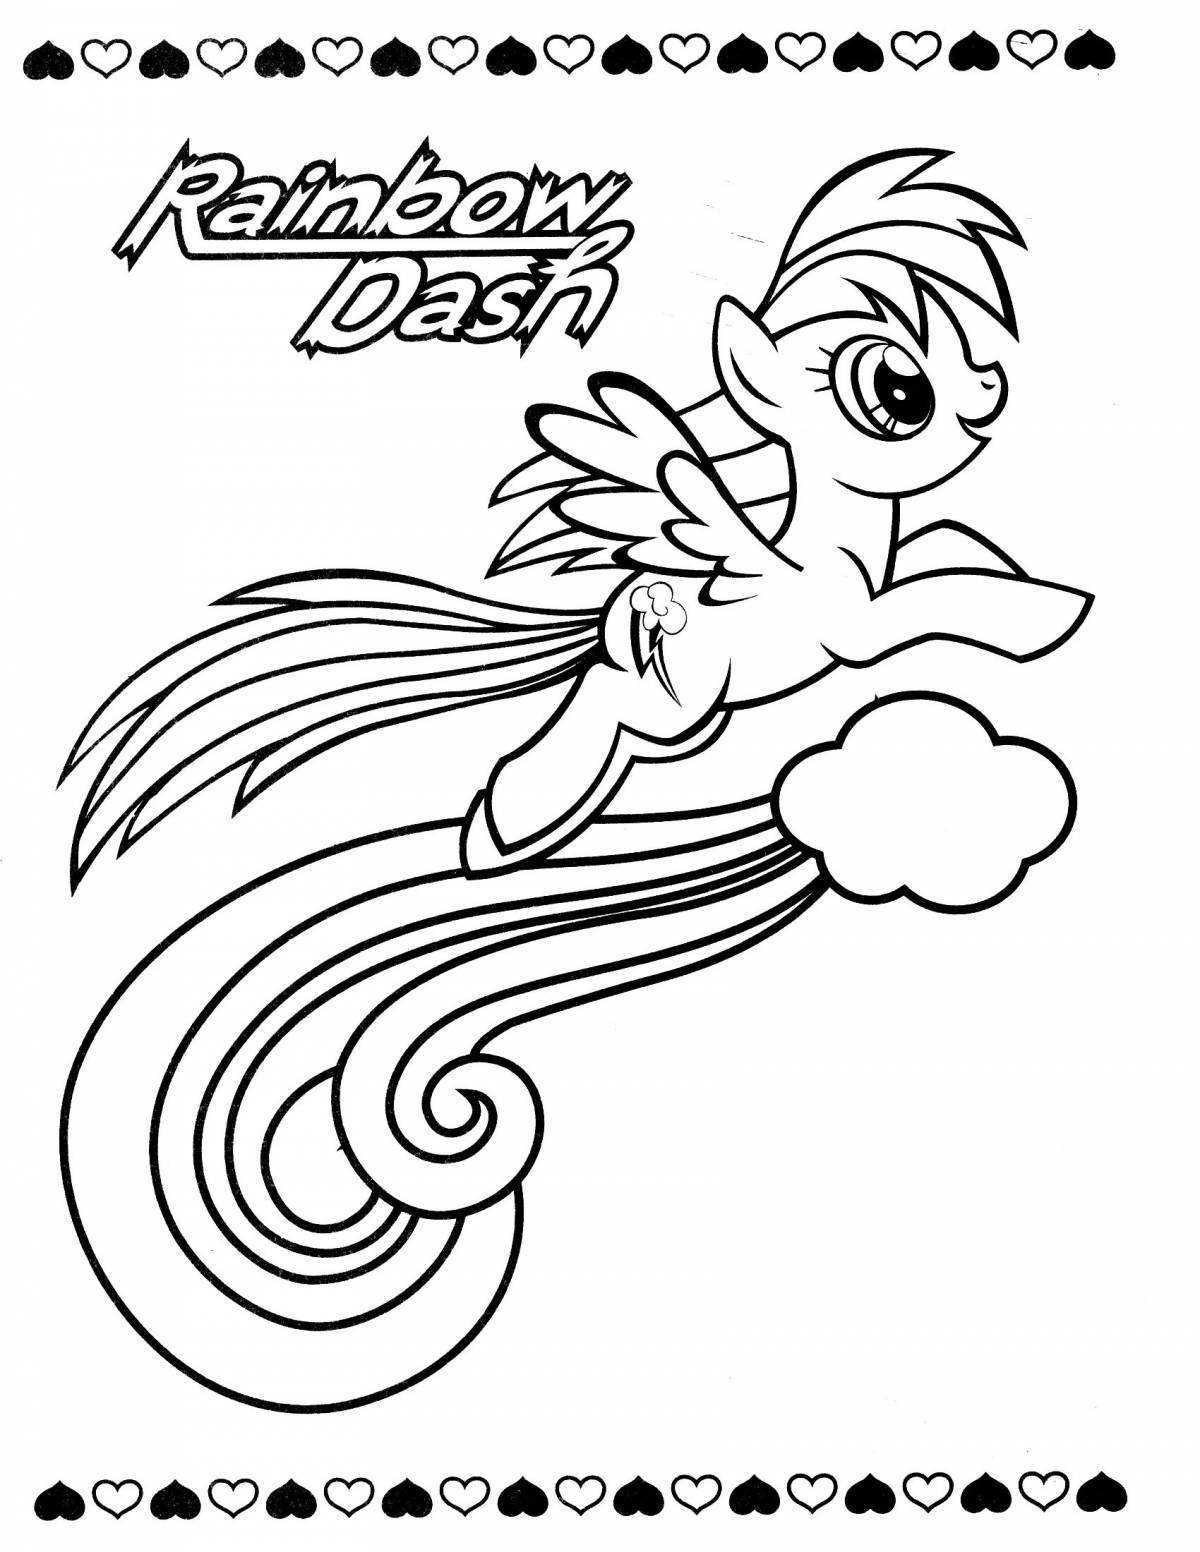 Happy ramball dash coloring page